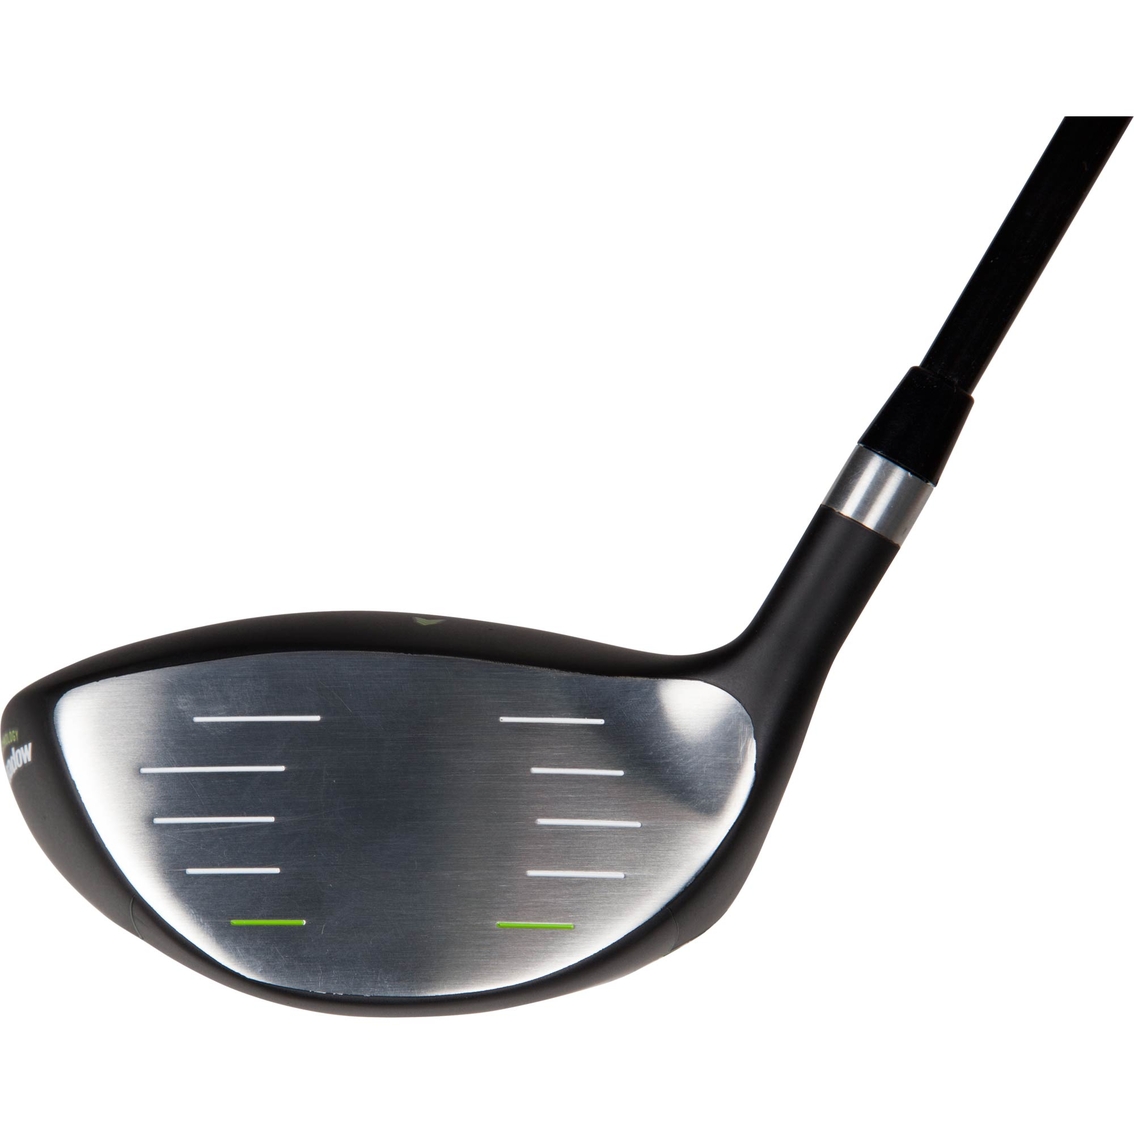 Pinemeadow Golf PGX 460cc Offset Driver - Image 4 of 4